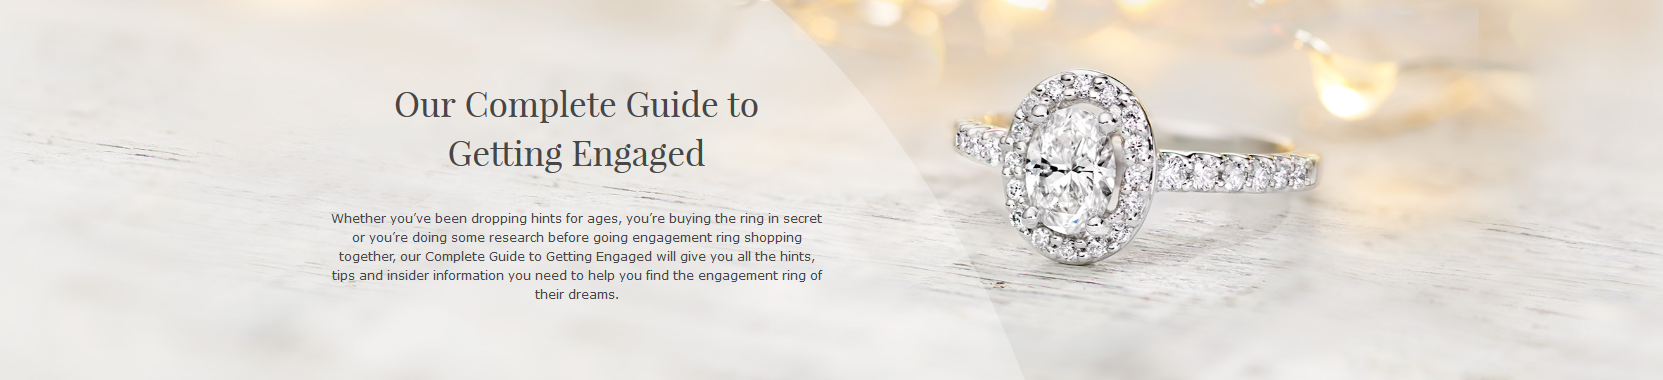 Screenshot-2018-2-3 Getting Engaged An Ultimate Guide from Beaverbrooks Beaverbrooks the Jewellers.png